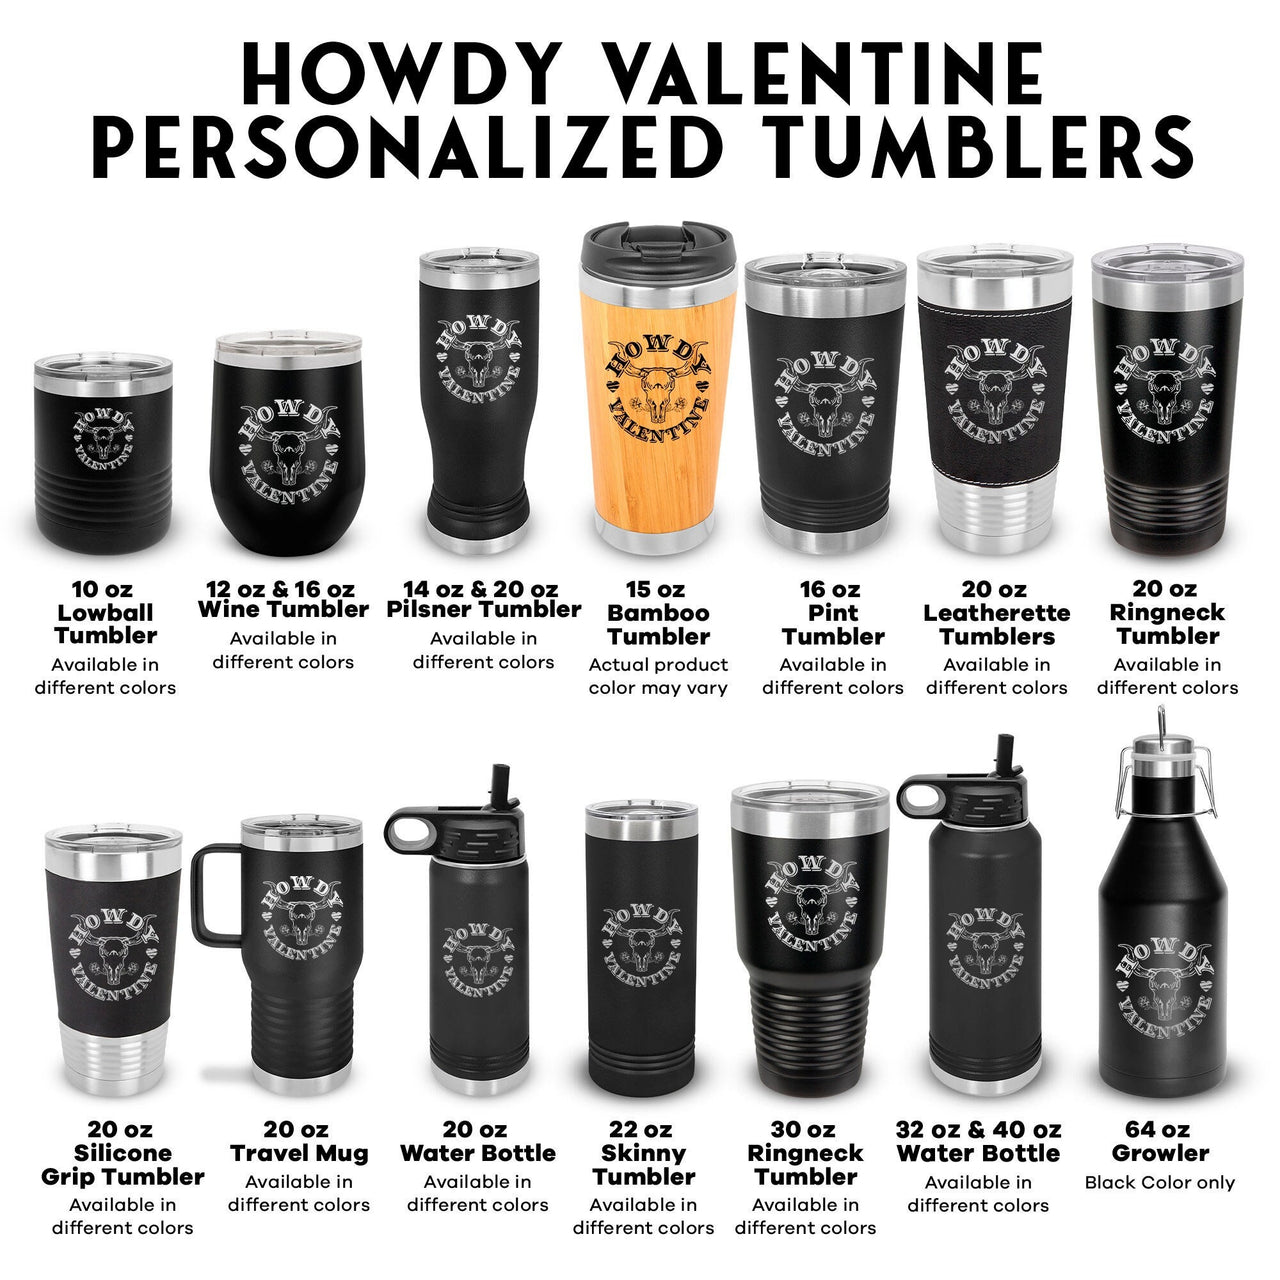 Retro Howdy Valentine Tumbler, Funny Valentines Bull Skull Tumbler, Western Valentine Day Gift for Cowboy, Types of Tumbler Gift for Him